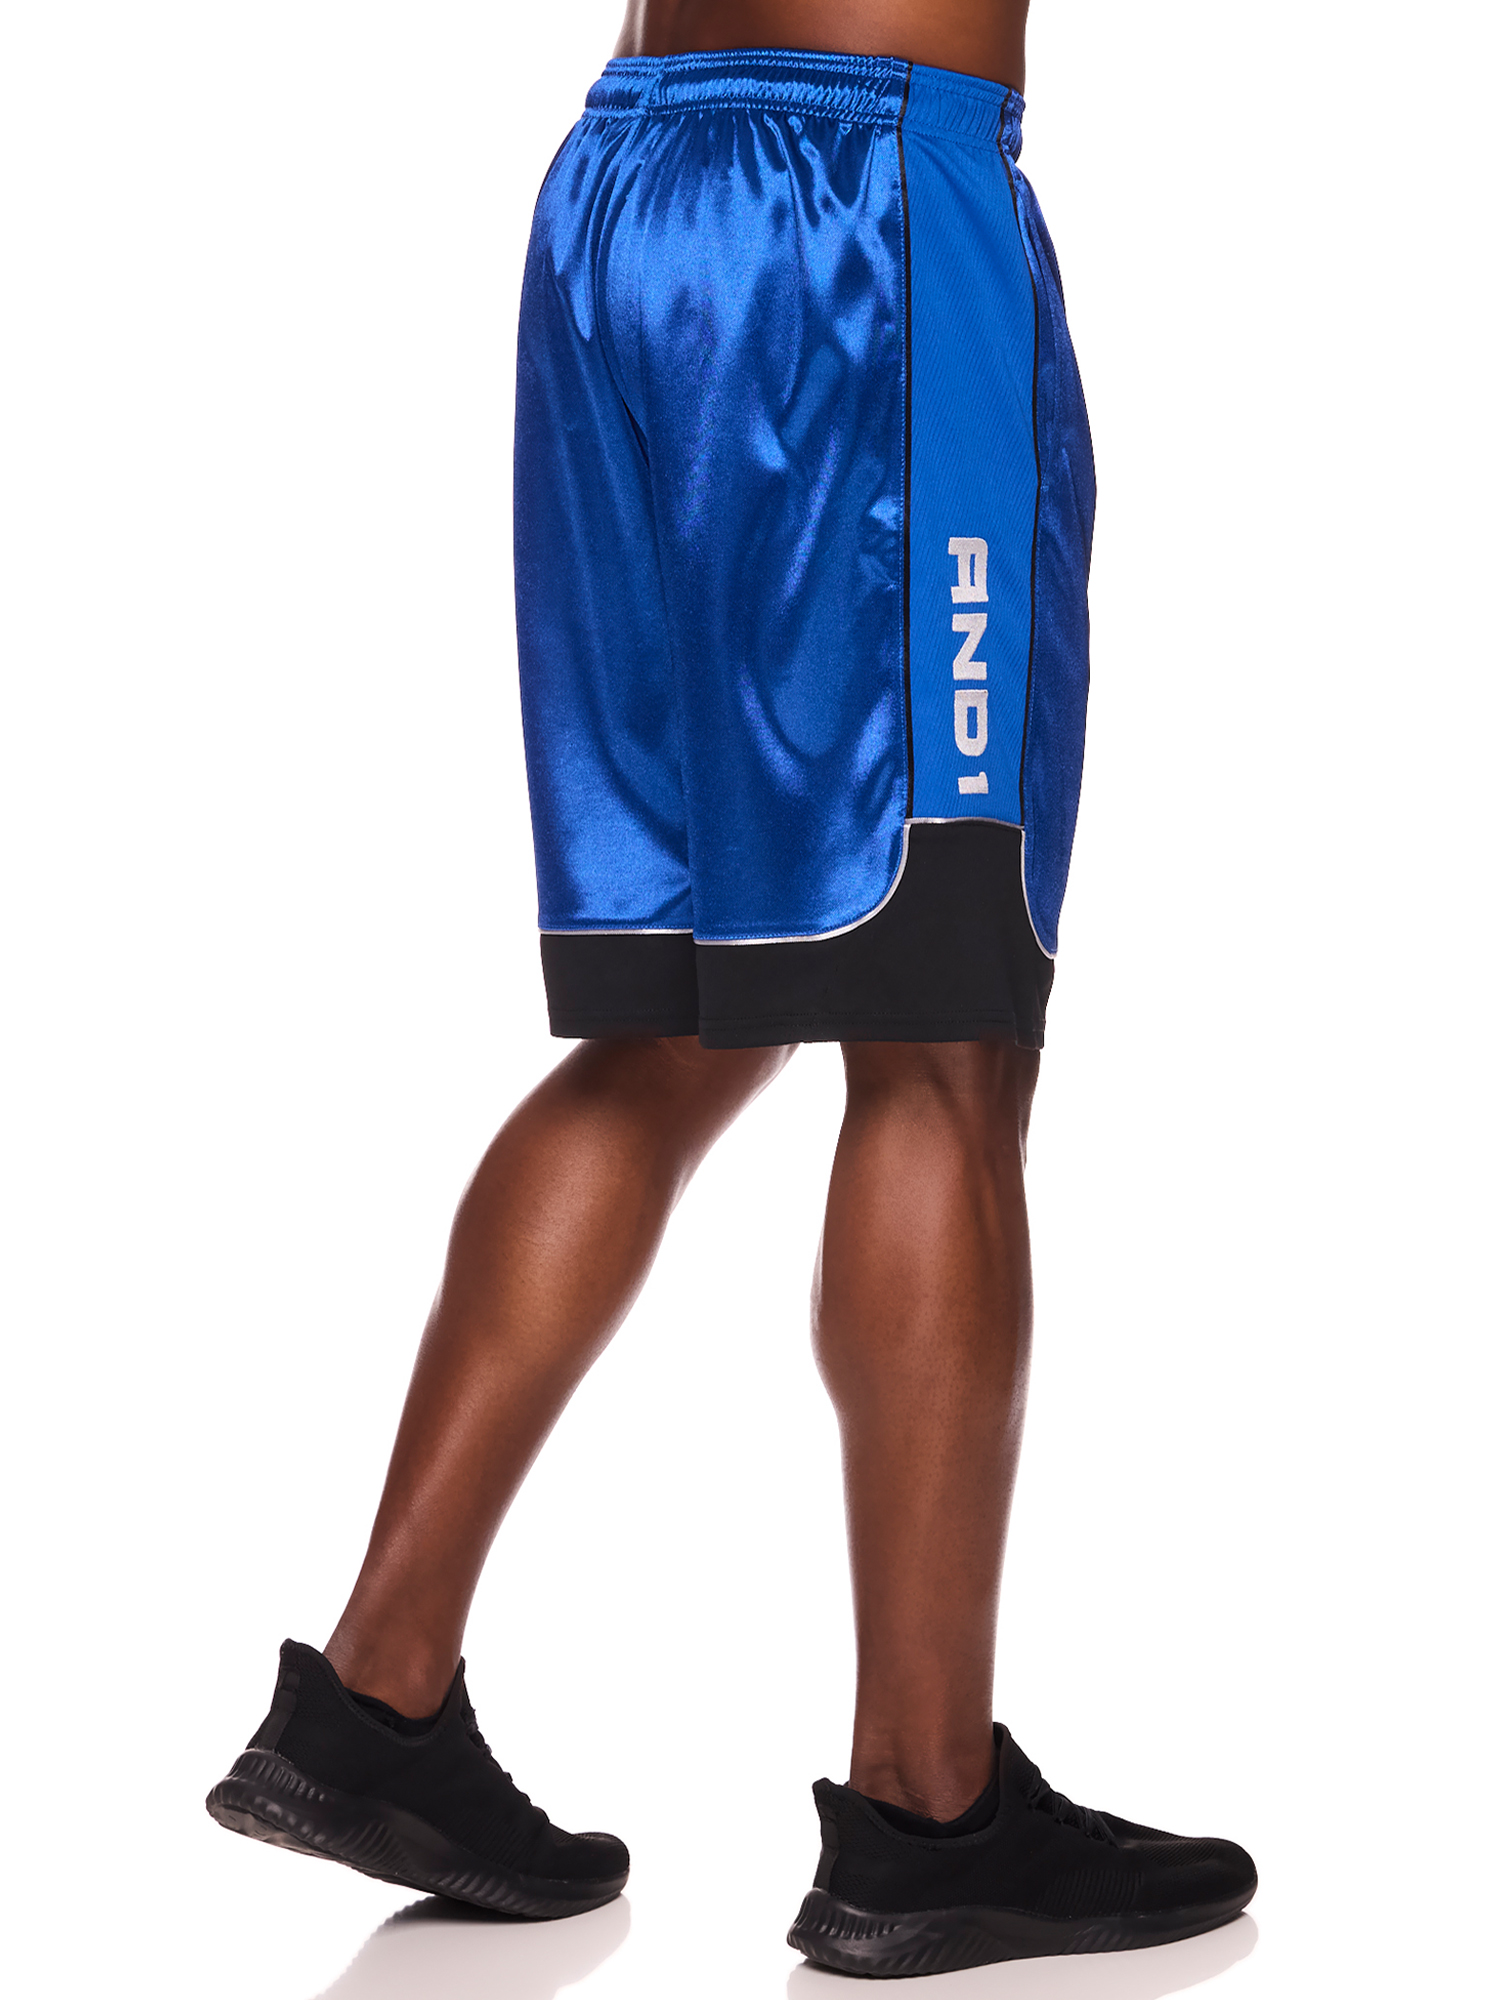 AND1 Men and Big Men's All Court Colorblock 11" Shorts, up to Size 3XL - image 2 of 5